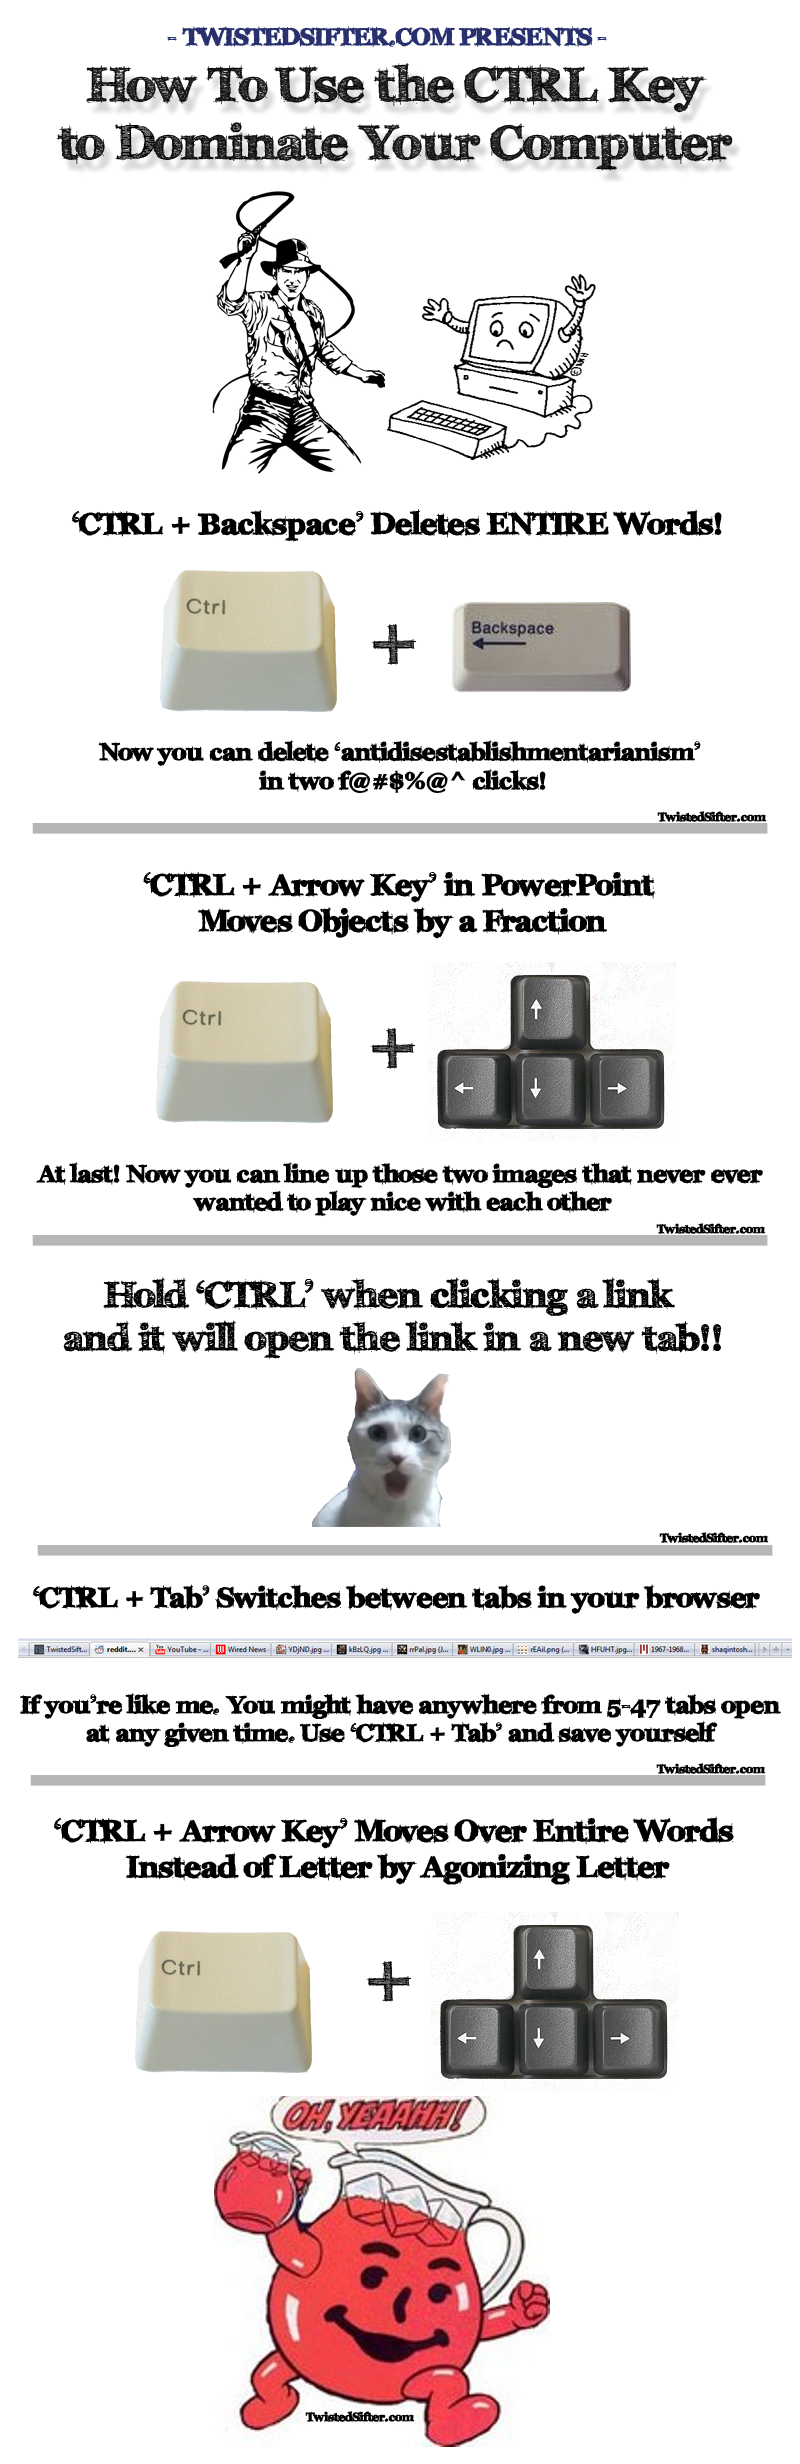 ctrl key shortcuts infographic HOW TO Use the CTRL Key to Dominate Your Computer